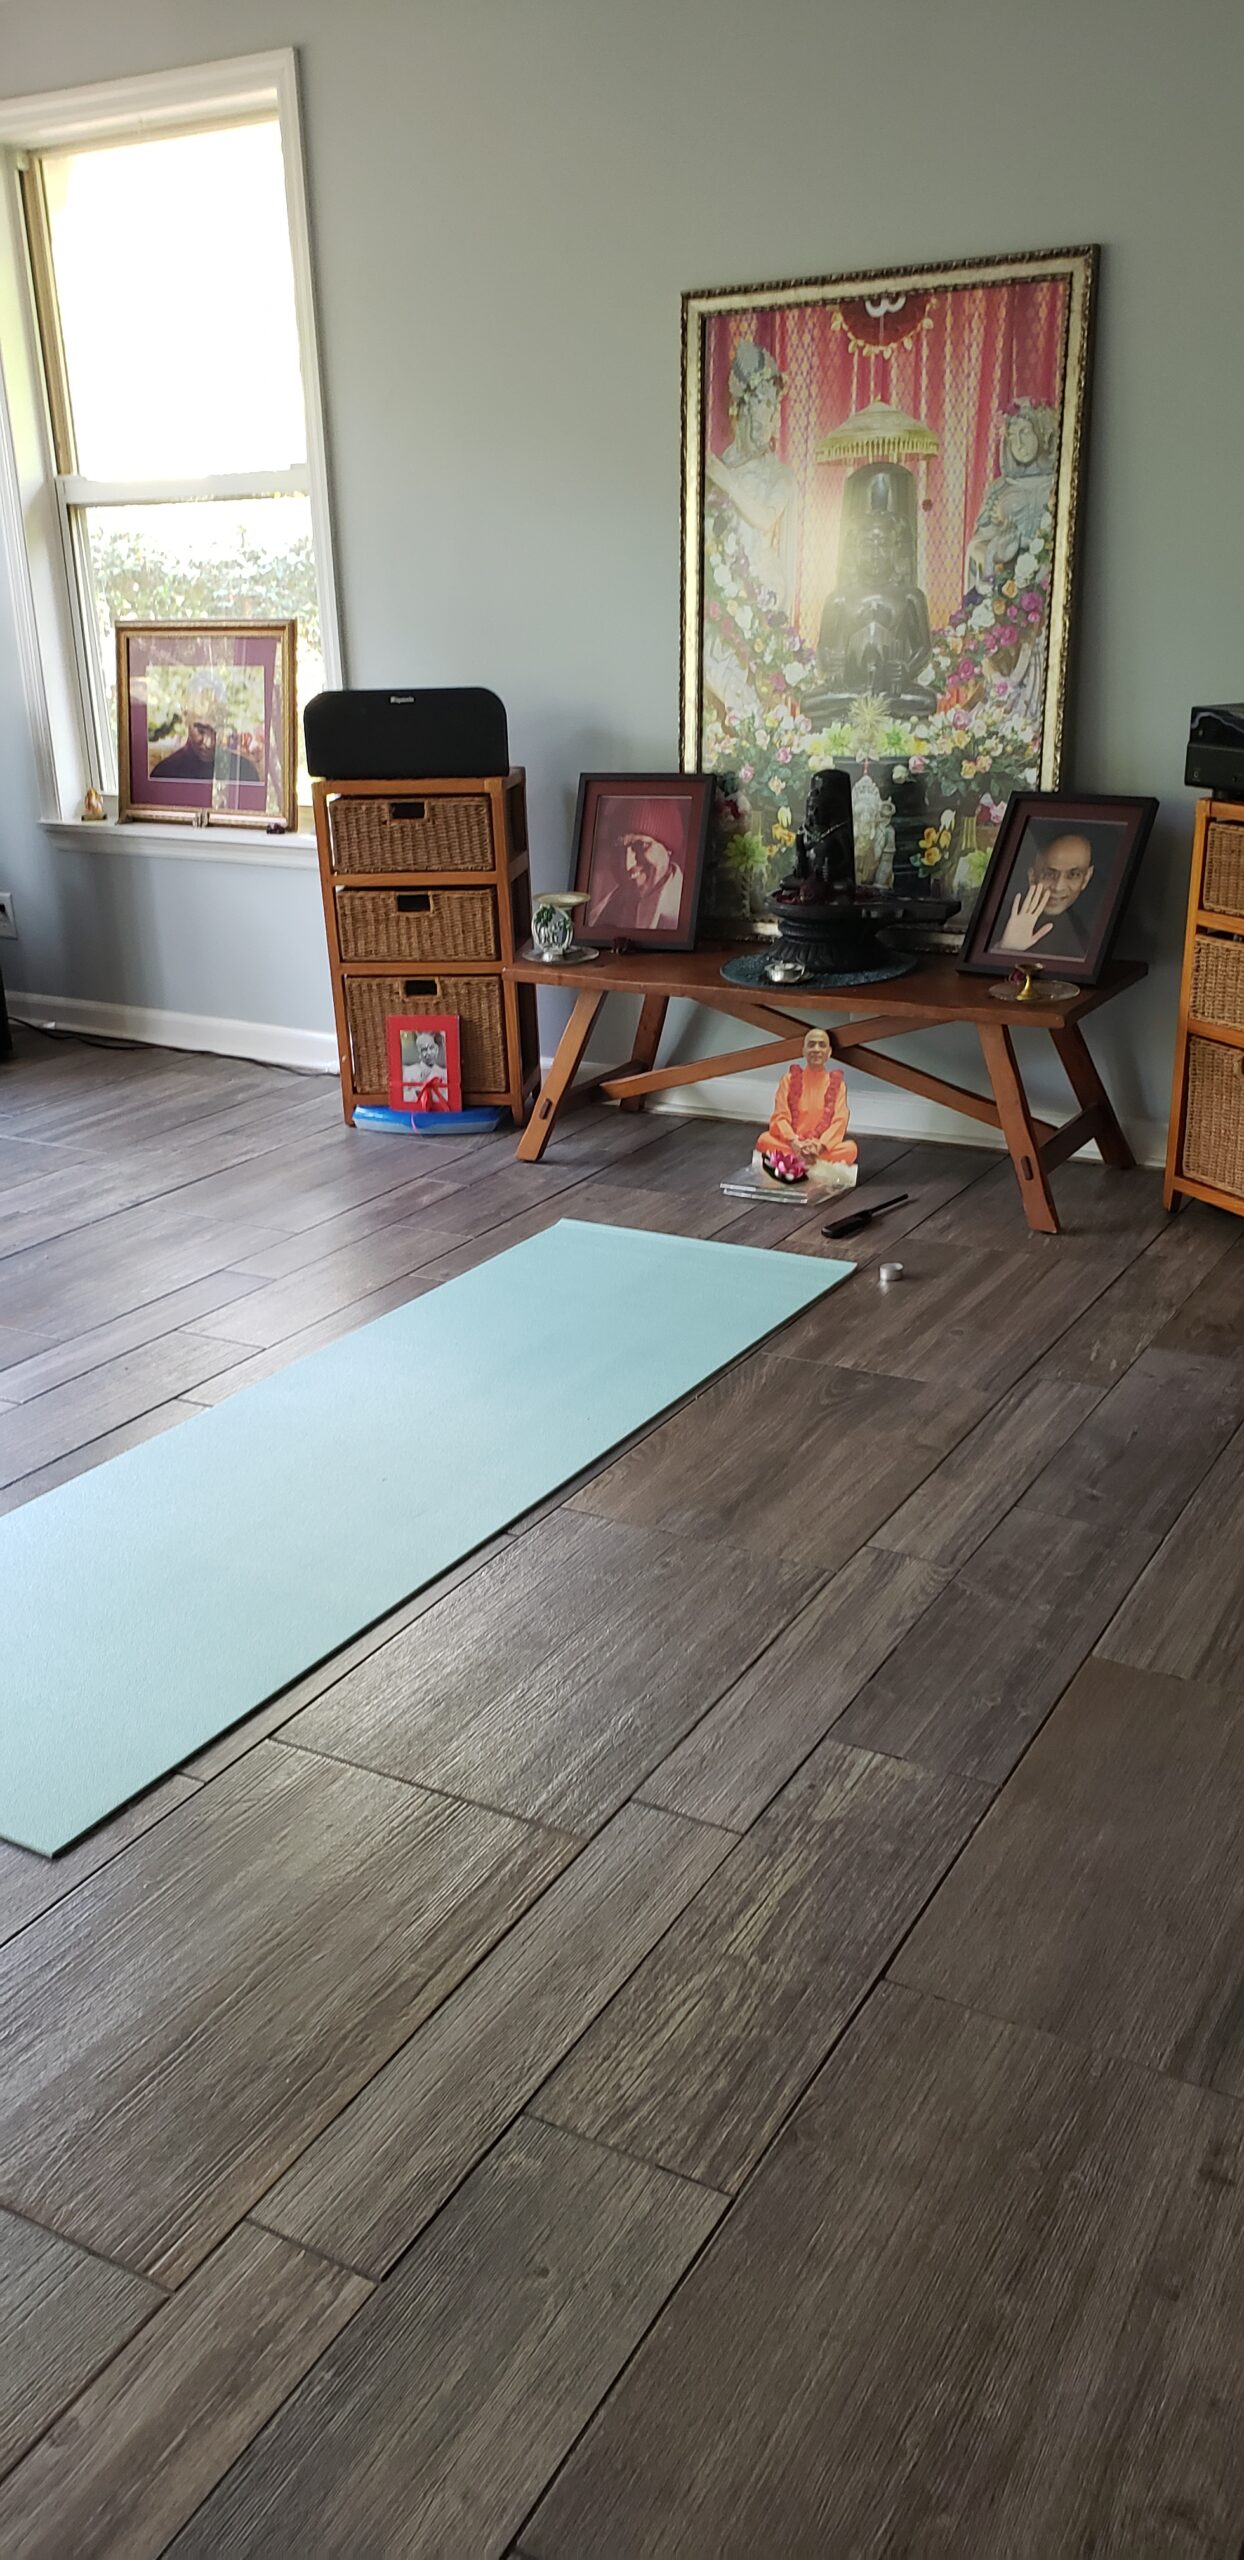 Photo is decorative. When touring a home, buyers like to see lots of floor space. This photo shows a yoga mat on the floor in front of an altar. Floors are bare wood.